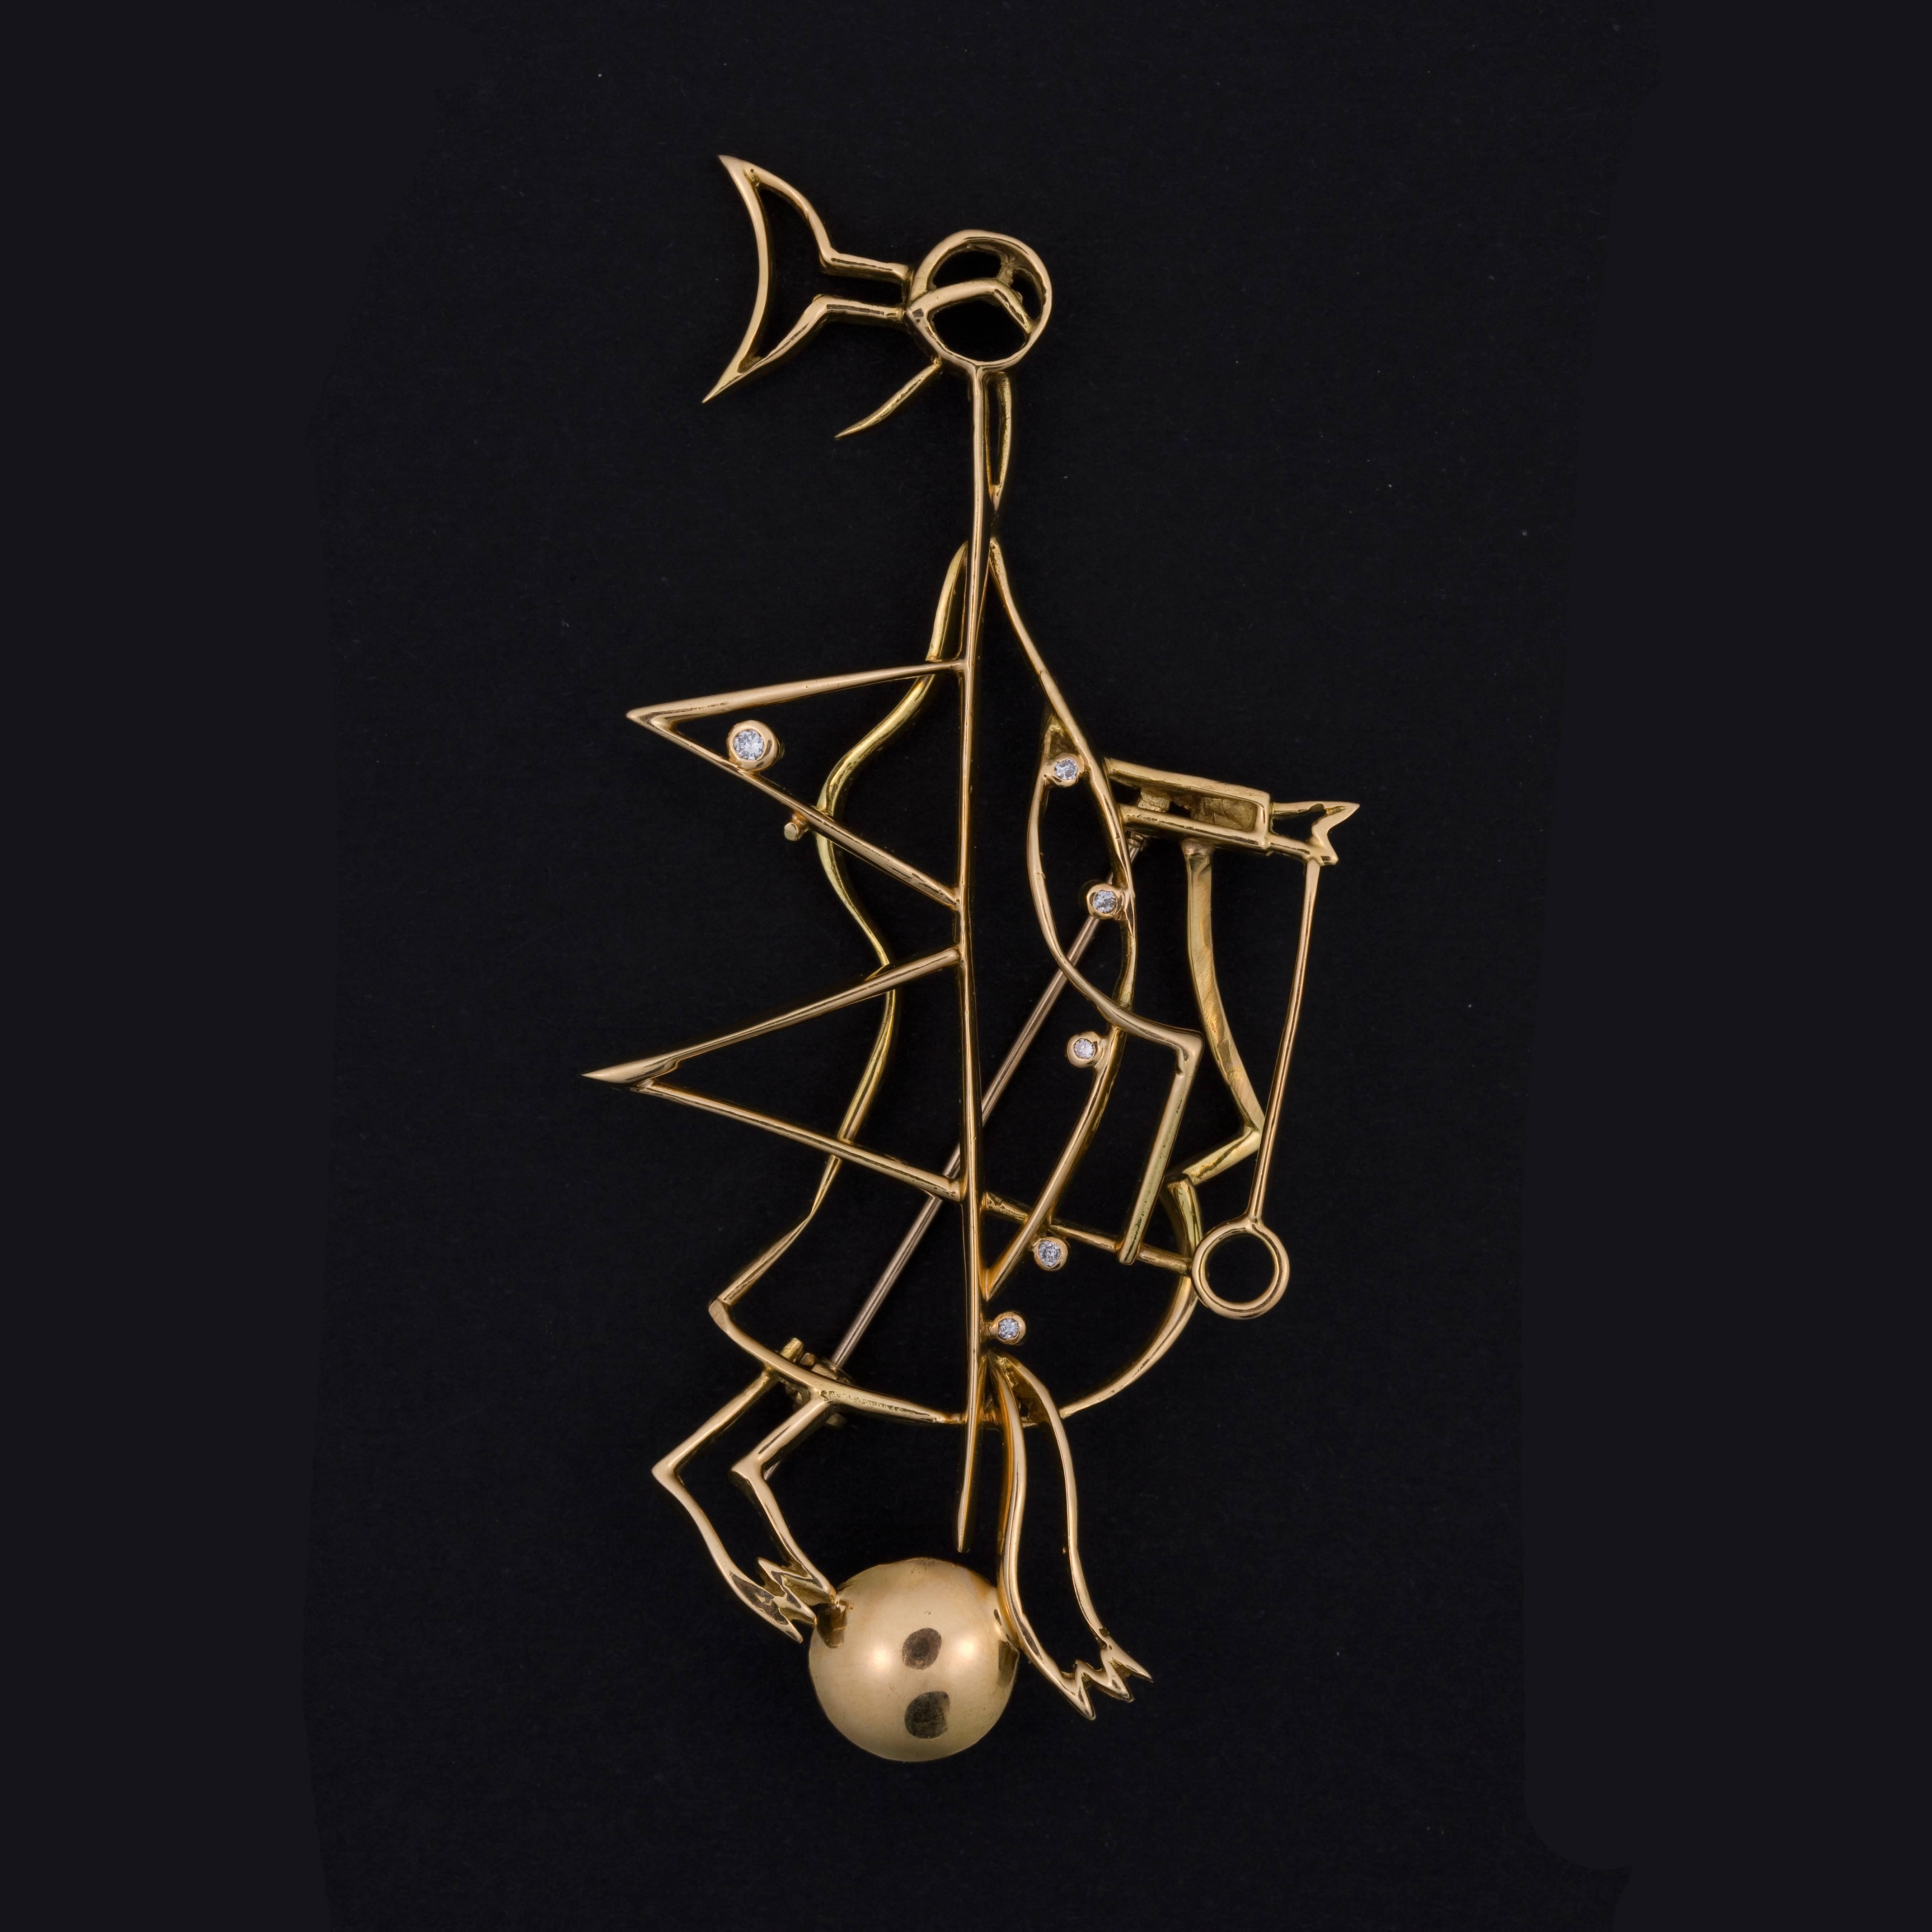 Express Shipping insured during the Lockdown

Exceptional 18K gold and Brilliants Cut Diamonds Brooch by Georges Braque (1882-1963), inventor of cubism.
This brooch feature the God 